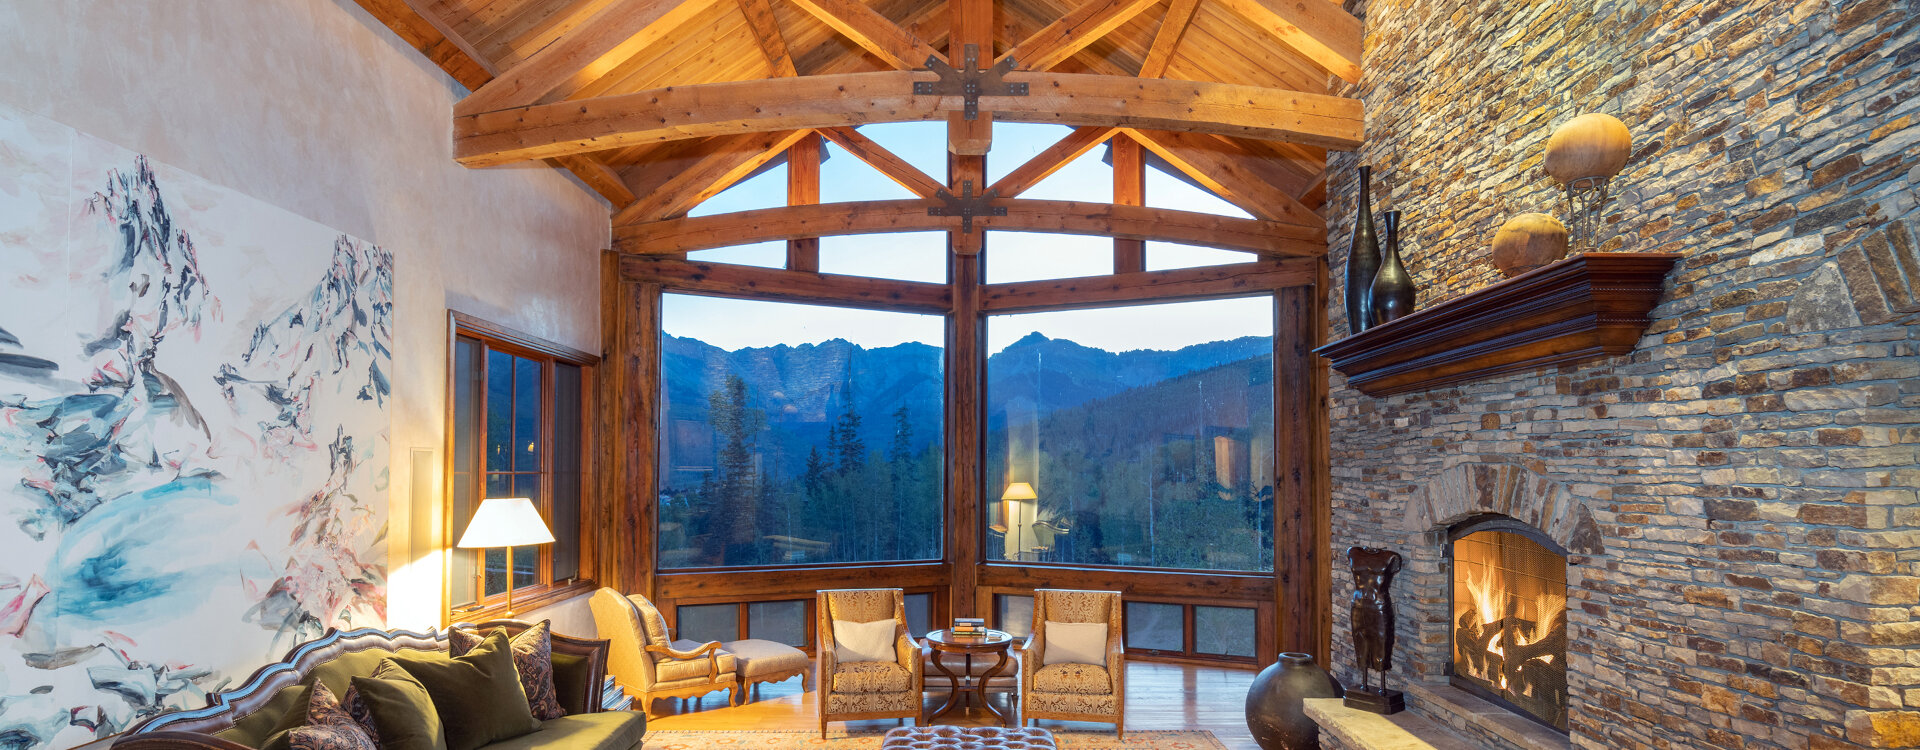 2.01-telluride-picture-perfect-living-room-view-glow